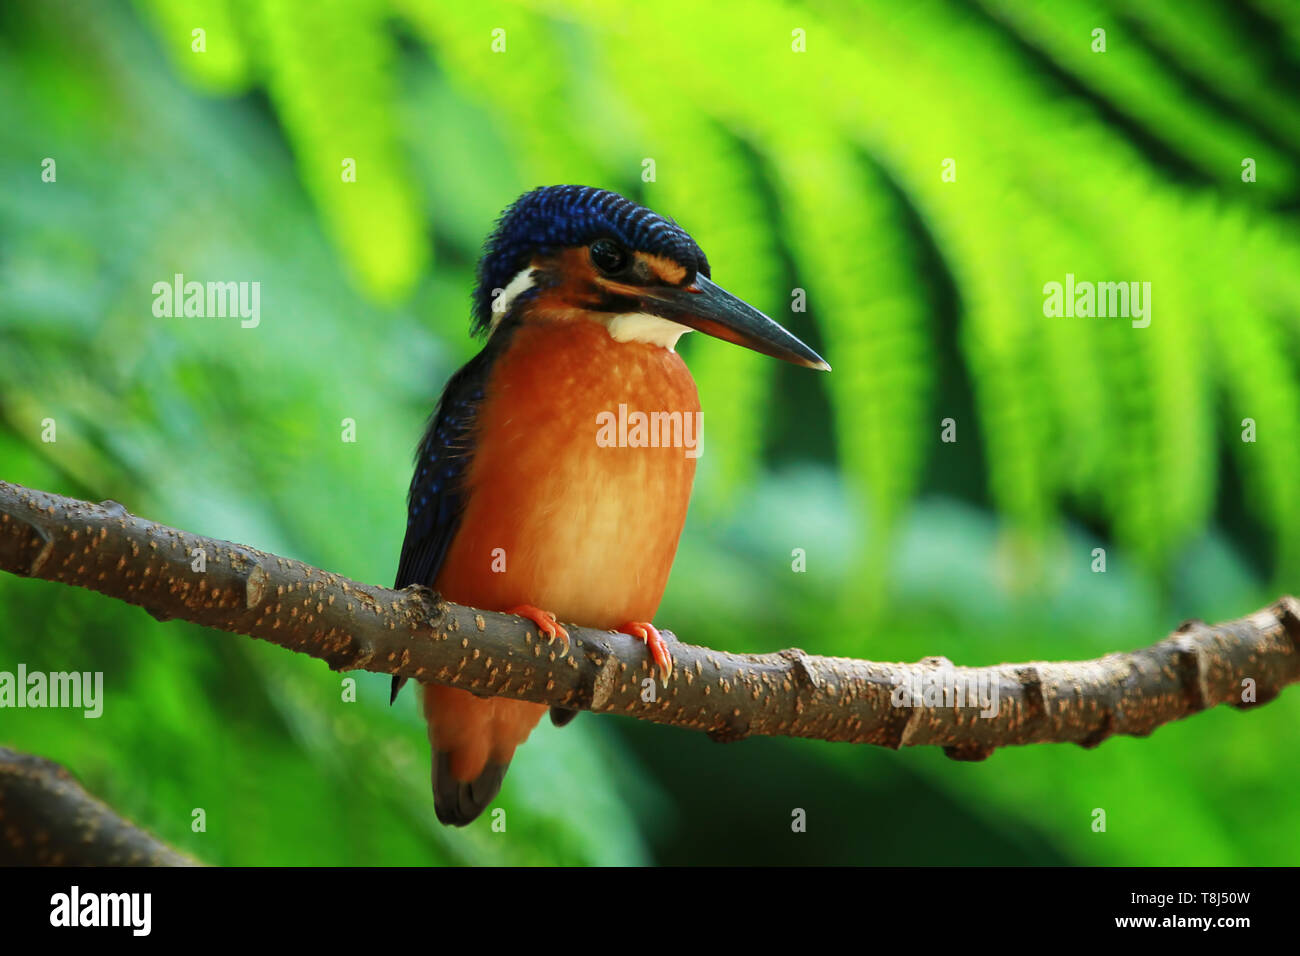 Common kingfisher on a branch, Indonesia Stock Photo